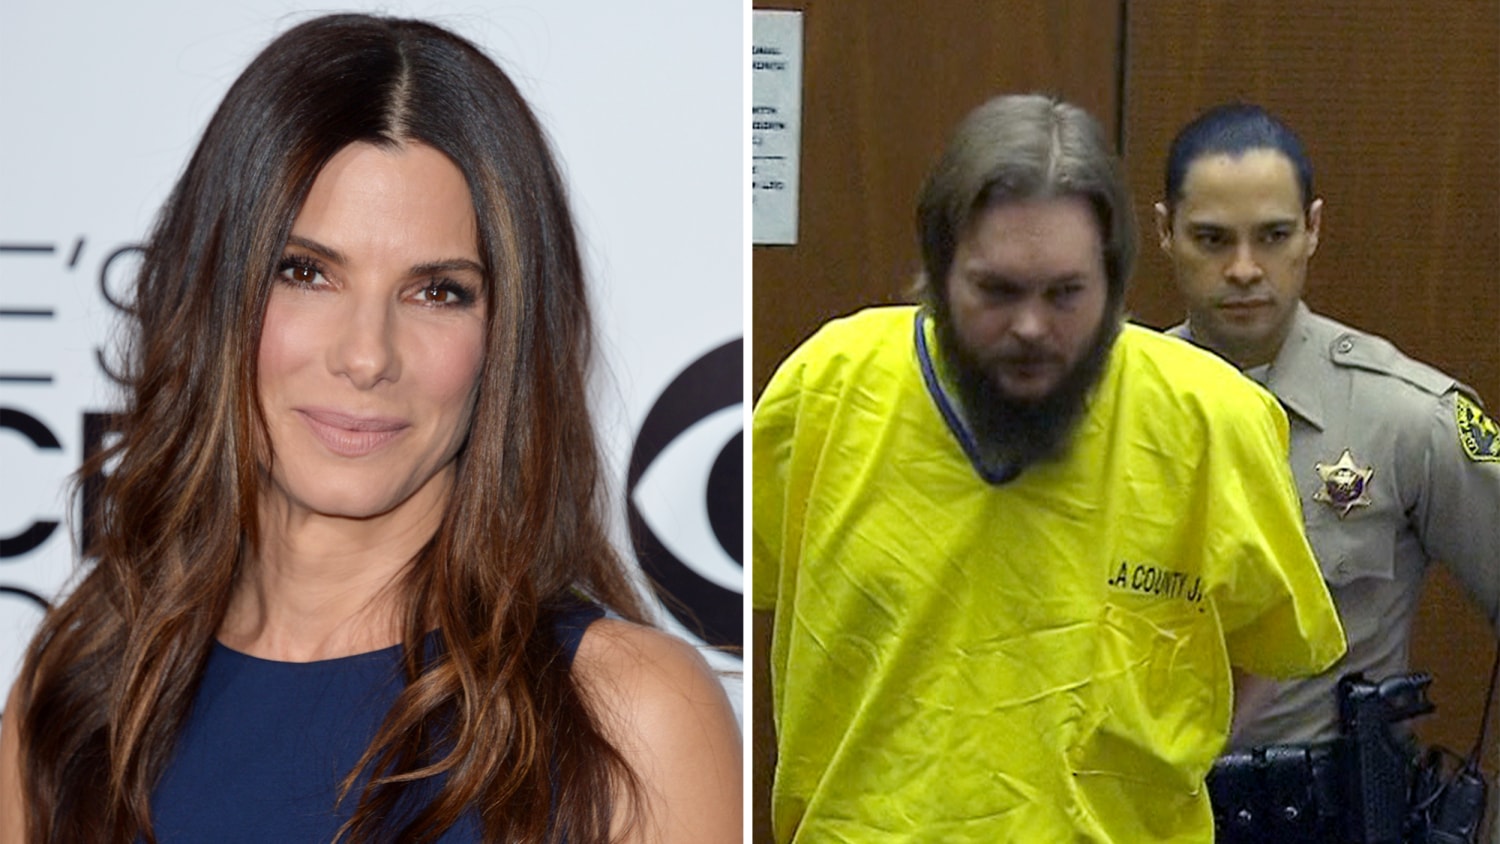 Sandra Bullock dials 911 from inside cupboard after stalker breaks into  house with love letter, The Independent